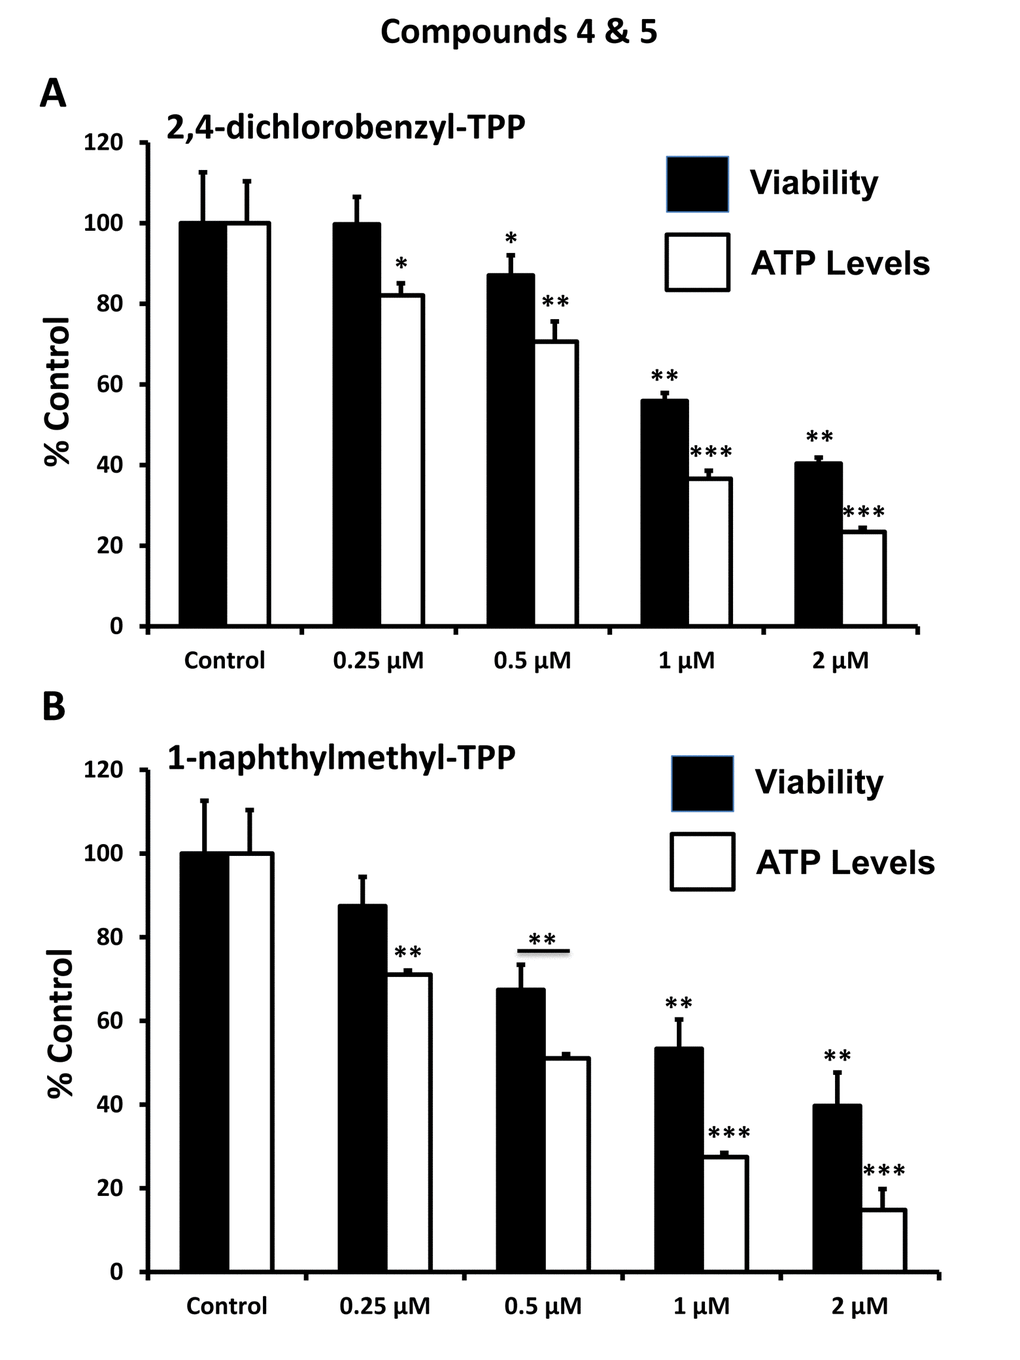 Effect of TPP derivatives on cell viability and intracellular ATP levels in MCF-7 human breast cancer cells: Compounds 4 and 5. Cell viability and intracellular ATP levels were determined in the same treated samples. Hoechst staining (%) (shown in black bars); ATP levels (%) indicated in white bars. MCF-7 cells were treated for 72h. Data are represented as mean +/- SEM. Note that both 2,4-dichlorobenzyl-TPP and 1-naphtylmethyl-TPP progressively deplete cellular ATP levels. *p 